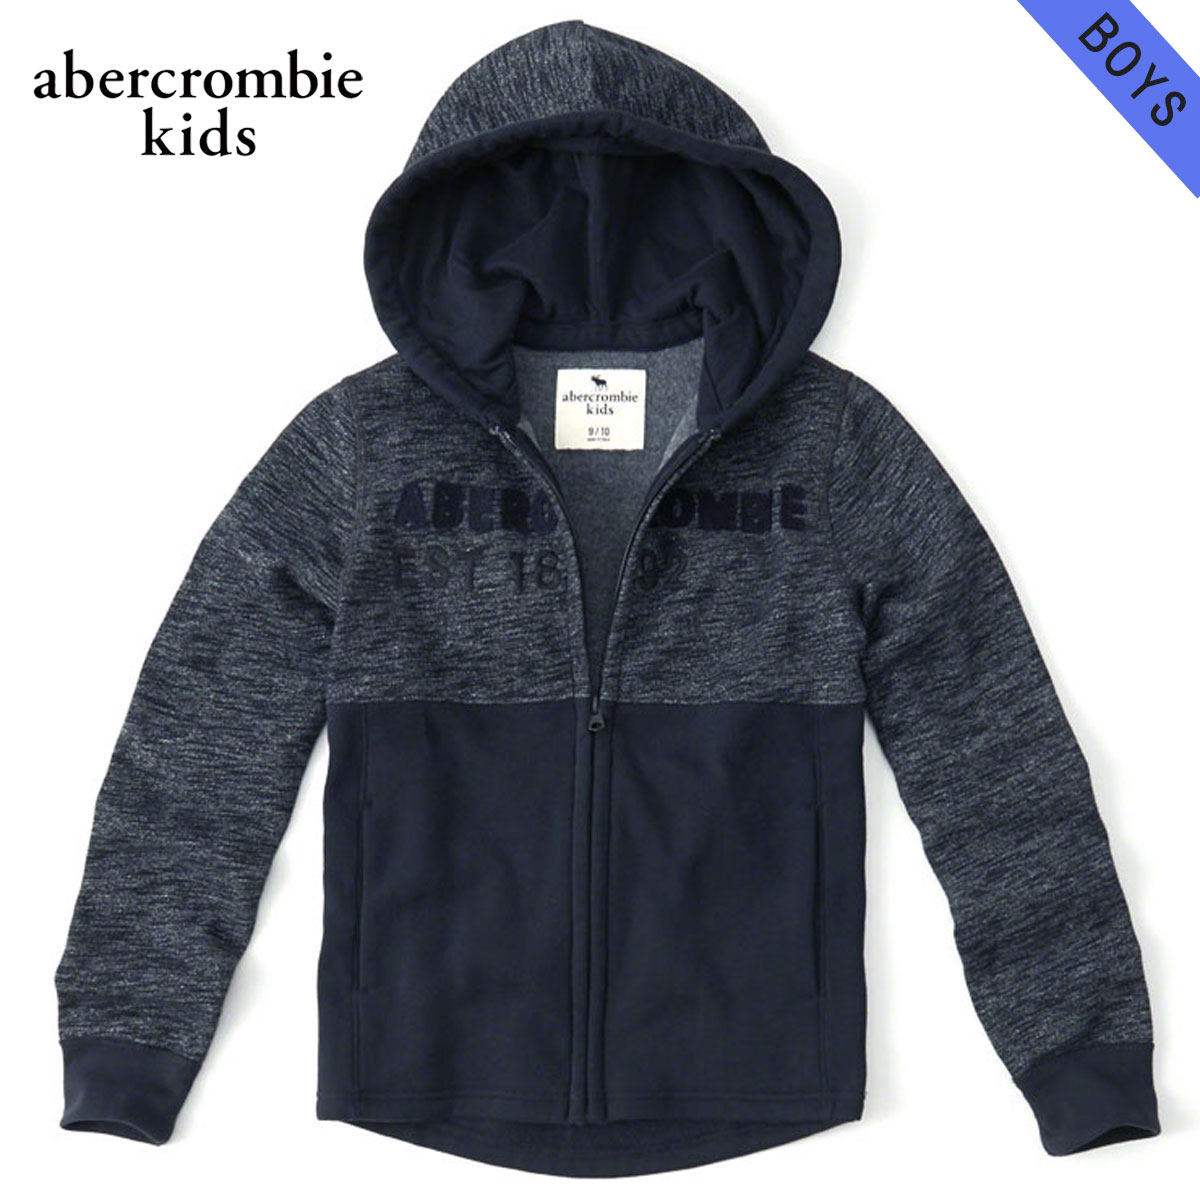 40%OFFセール  アバクロキッズ パーカー ボーイズ 子供服 正規品 AbercrombieKids logo full zip hoodie 222-628-0016-022 D00S20 父の日 プレゼント ラッピング